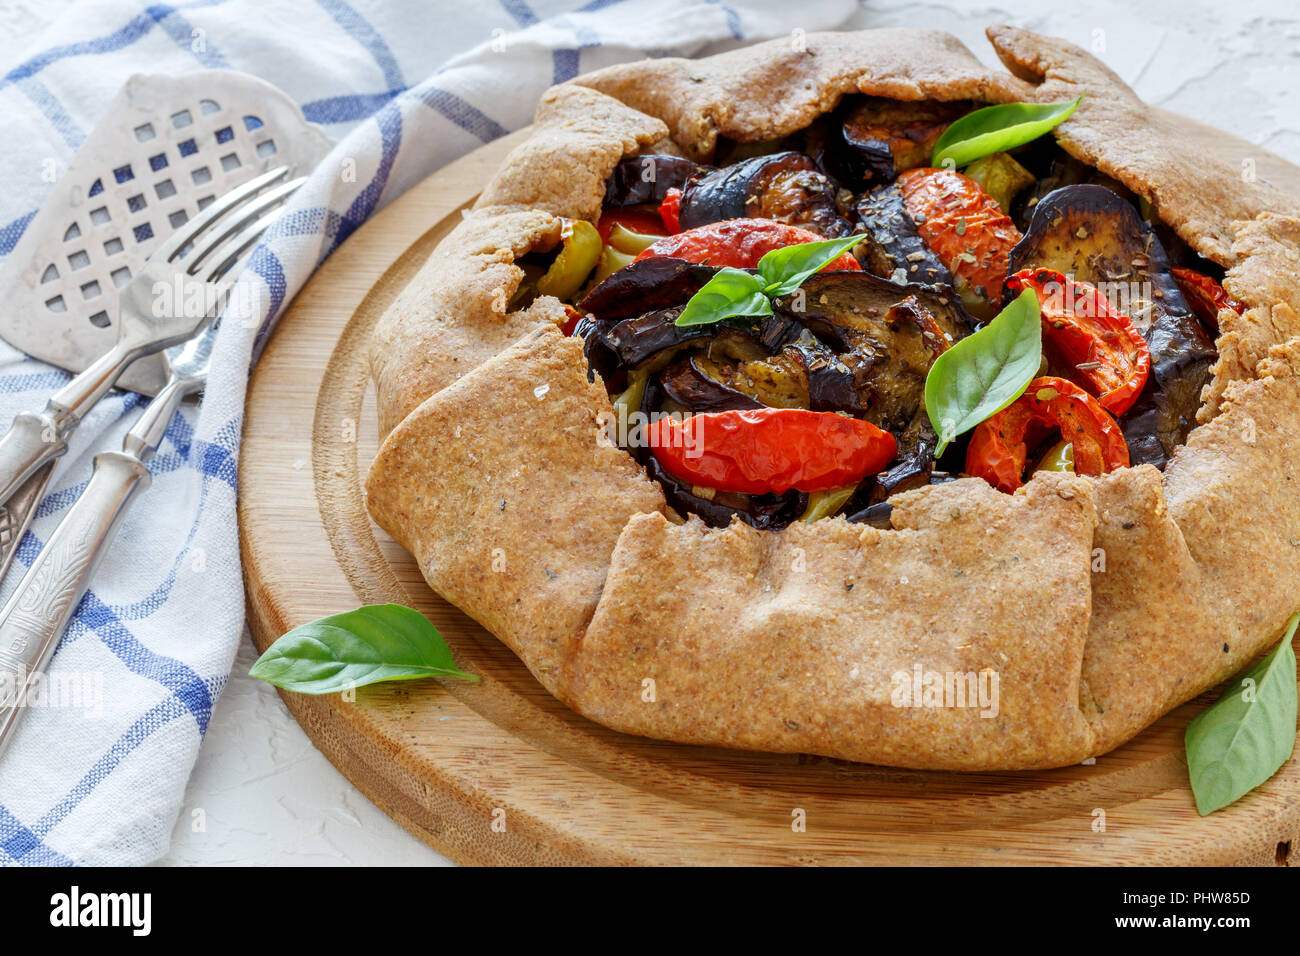 Homemade whole-grain galette with vegetables. Stock Photo